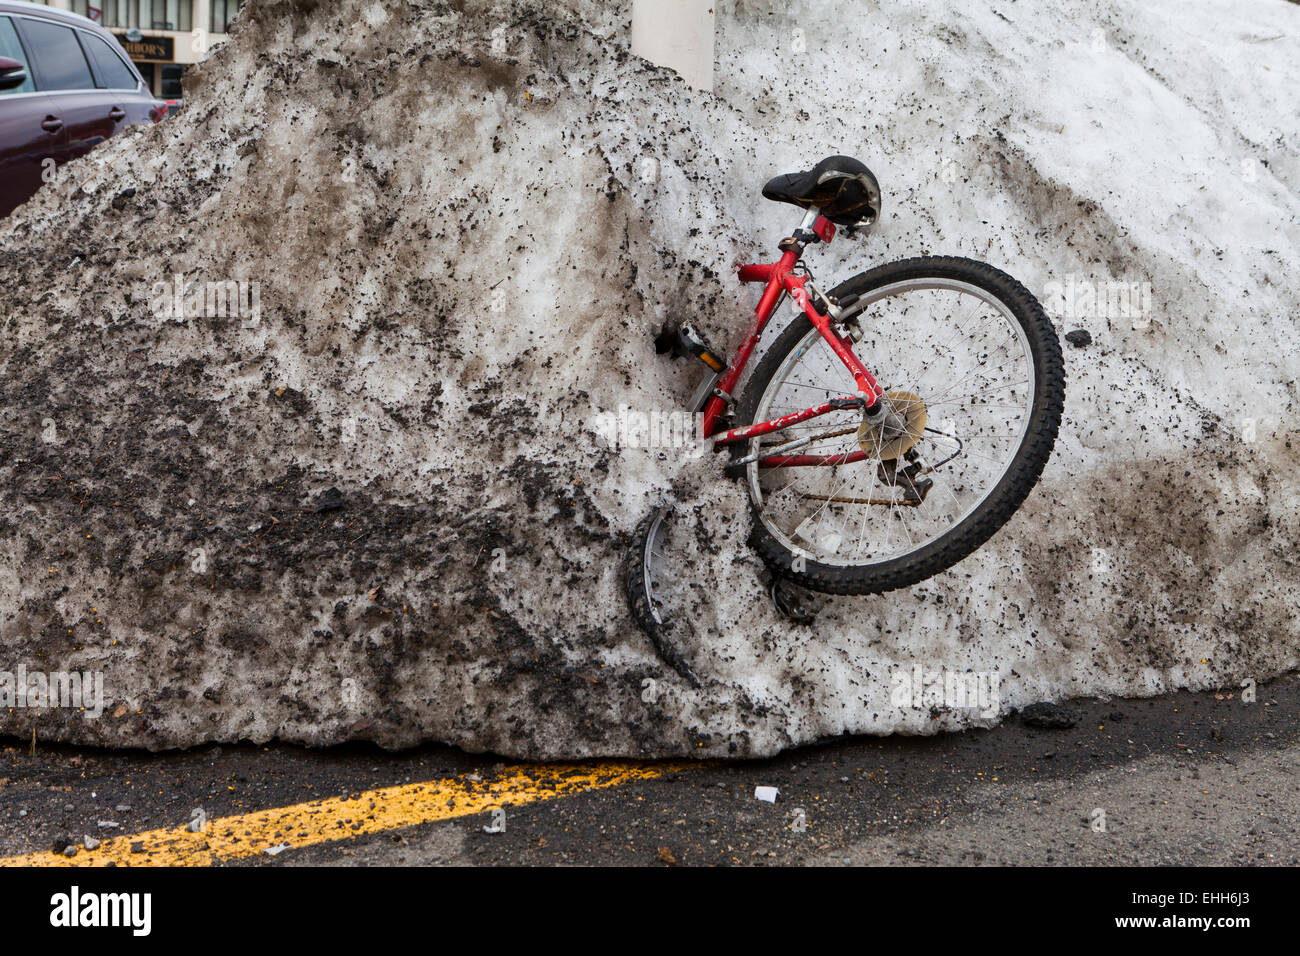 Bicycle stuck in plowed snow pile - USA Stock Photo